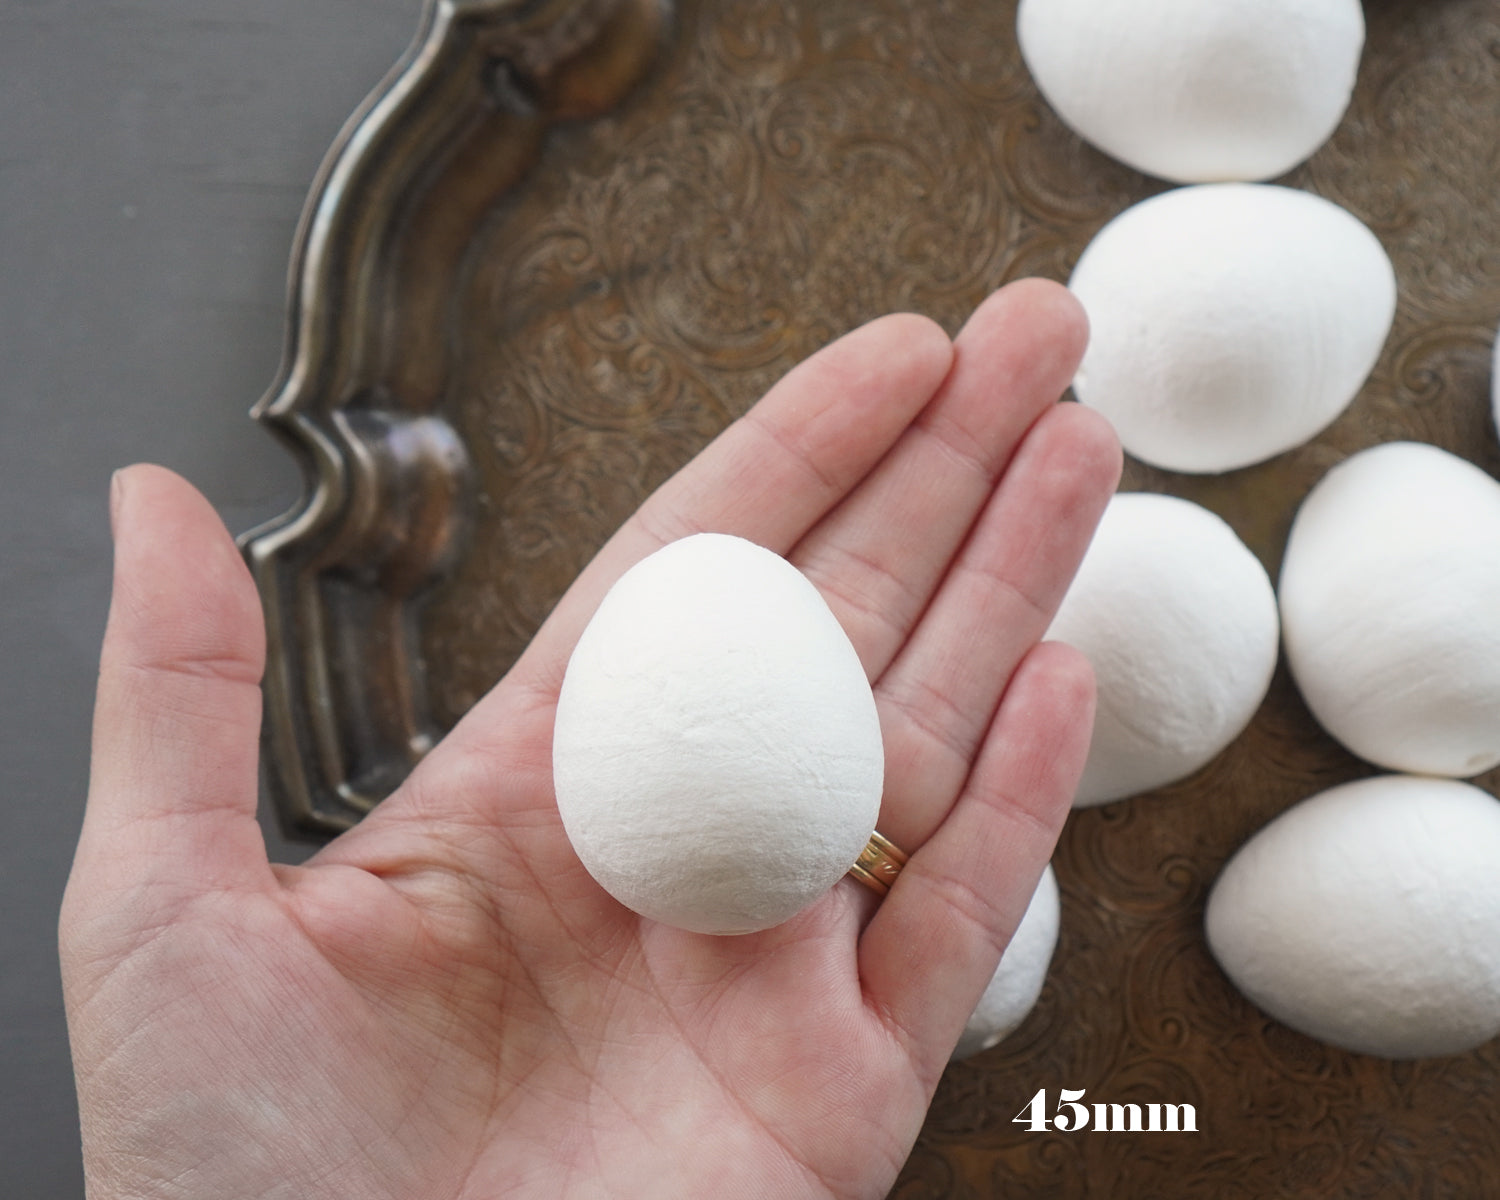 Spun Cotton Eggs, Vintage-Style Craft Shapes, Select by Size